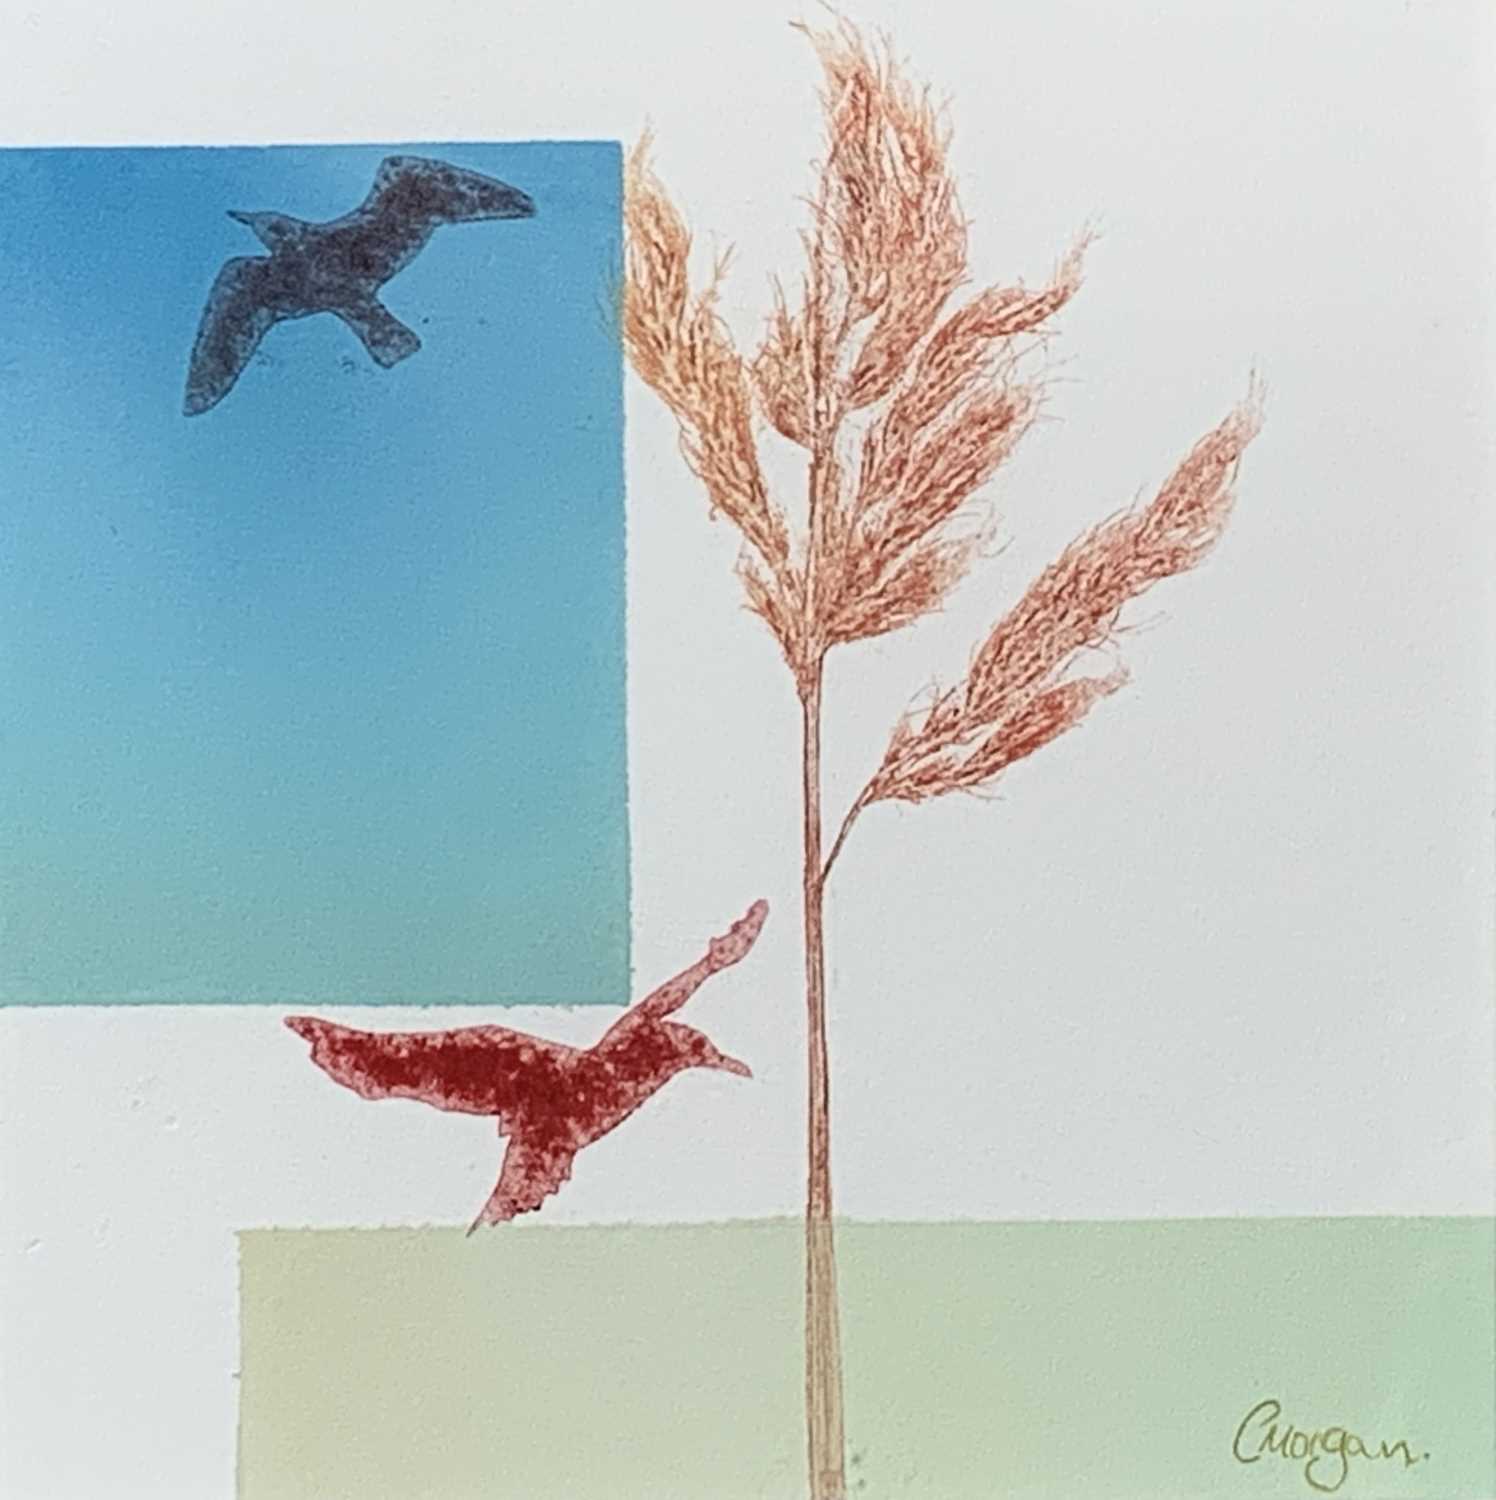 Charlotte MORGAN 'Love Birds' and 'Park Life'Two monoprints Each signed Together with a mezzotint ' - Image 7 of 9